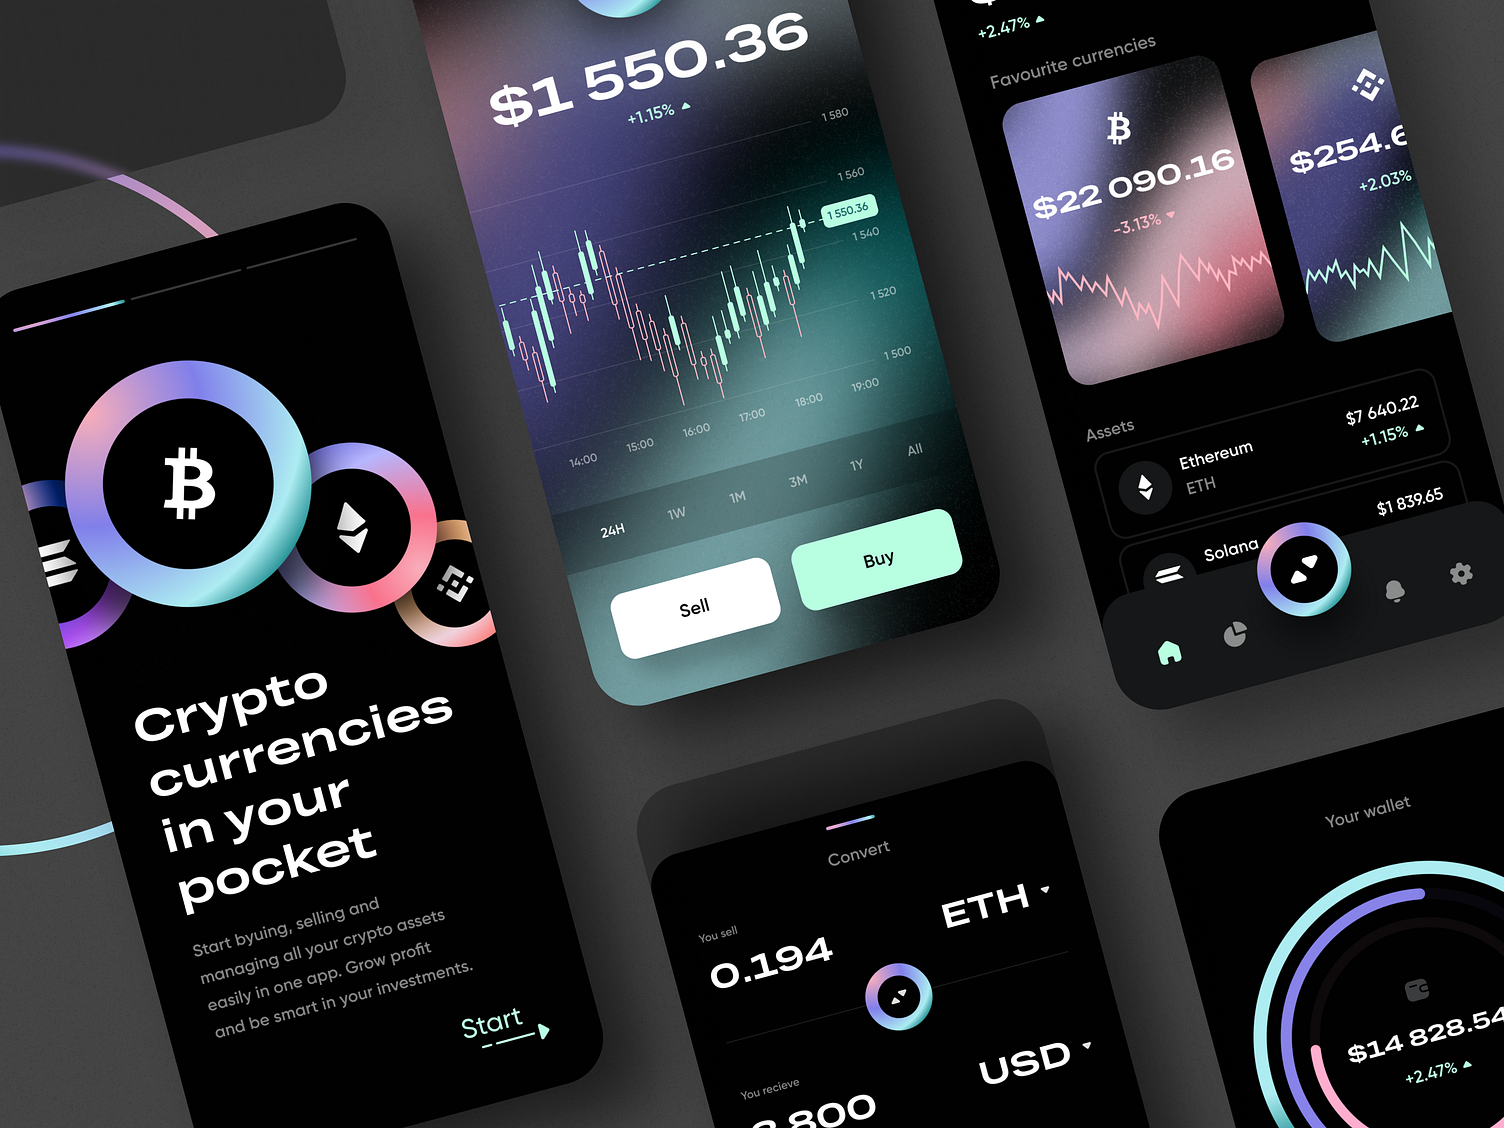 mobile crypto wallet app